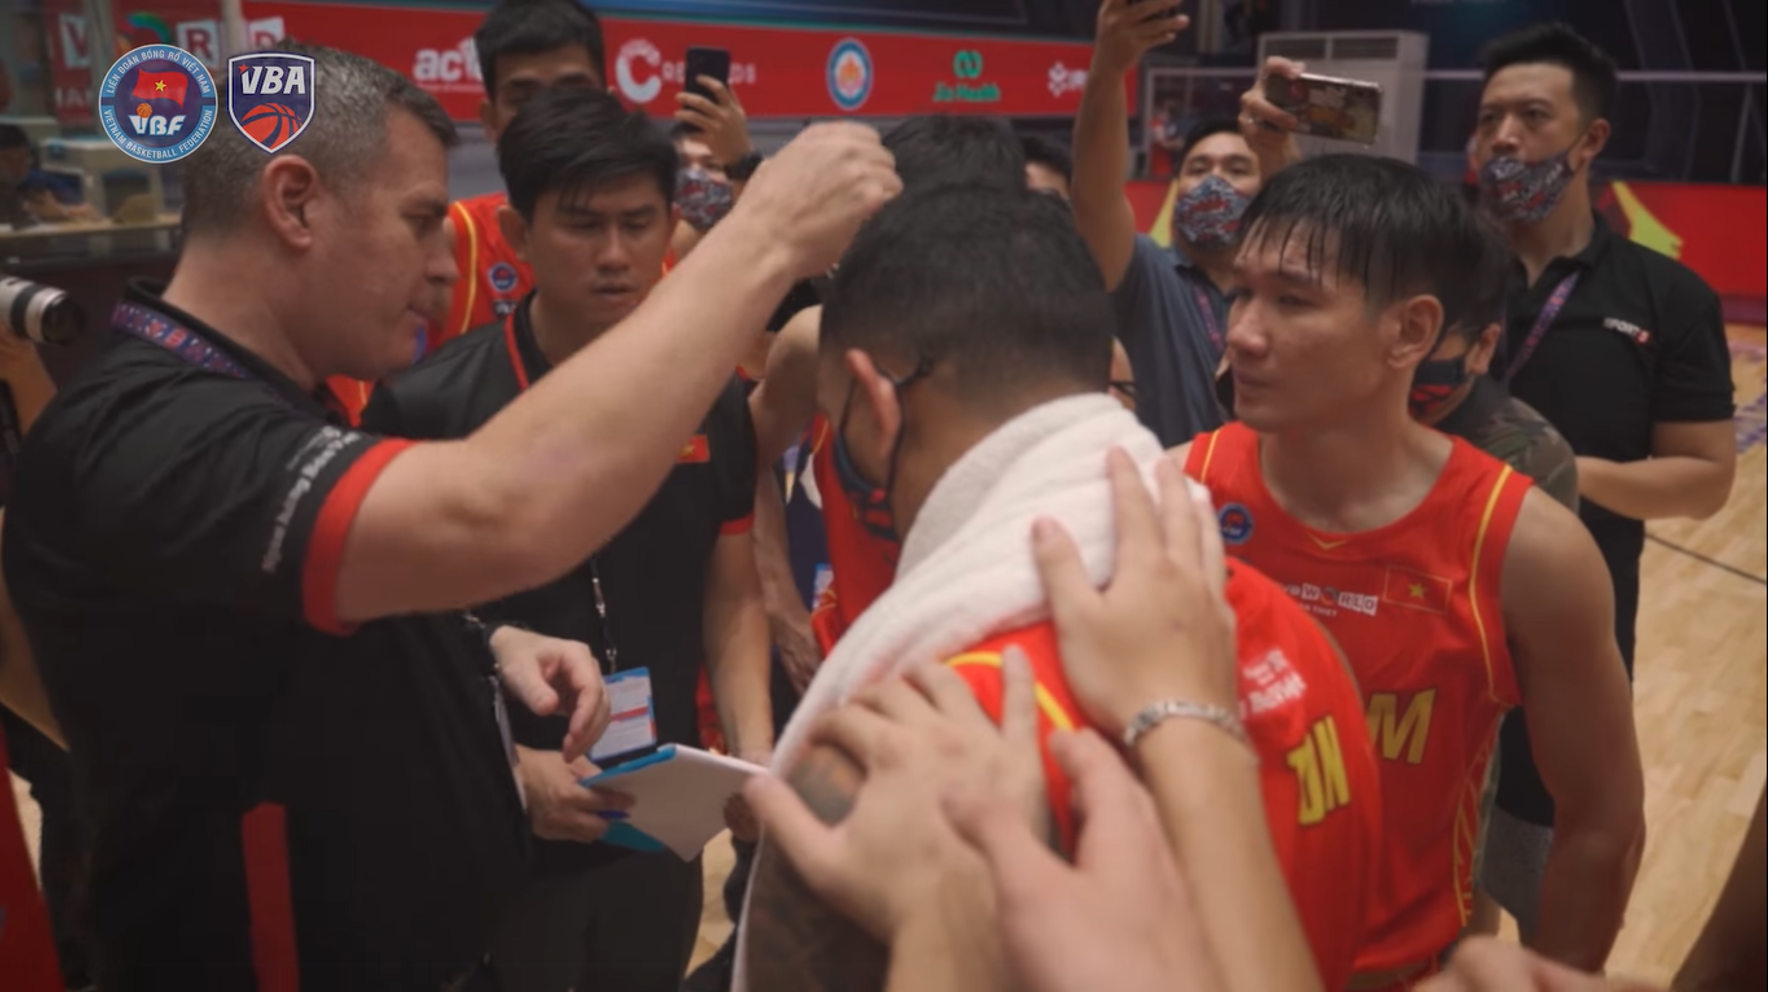 Coach Kevin Yurkus (L) of the Vietnamese national basketball team discusses the strategy with his athletes. Photo: VBA